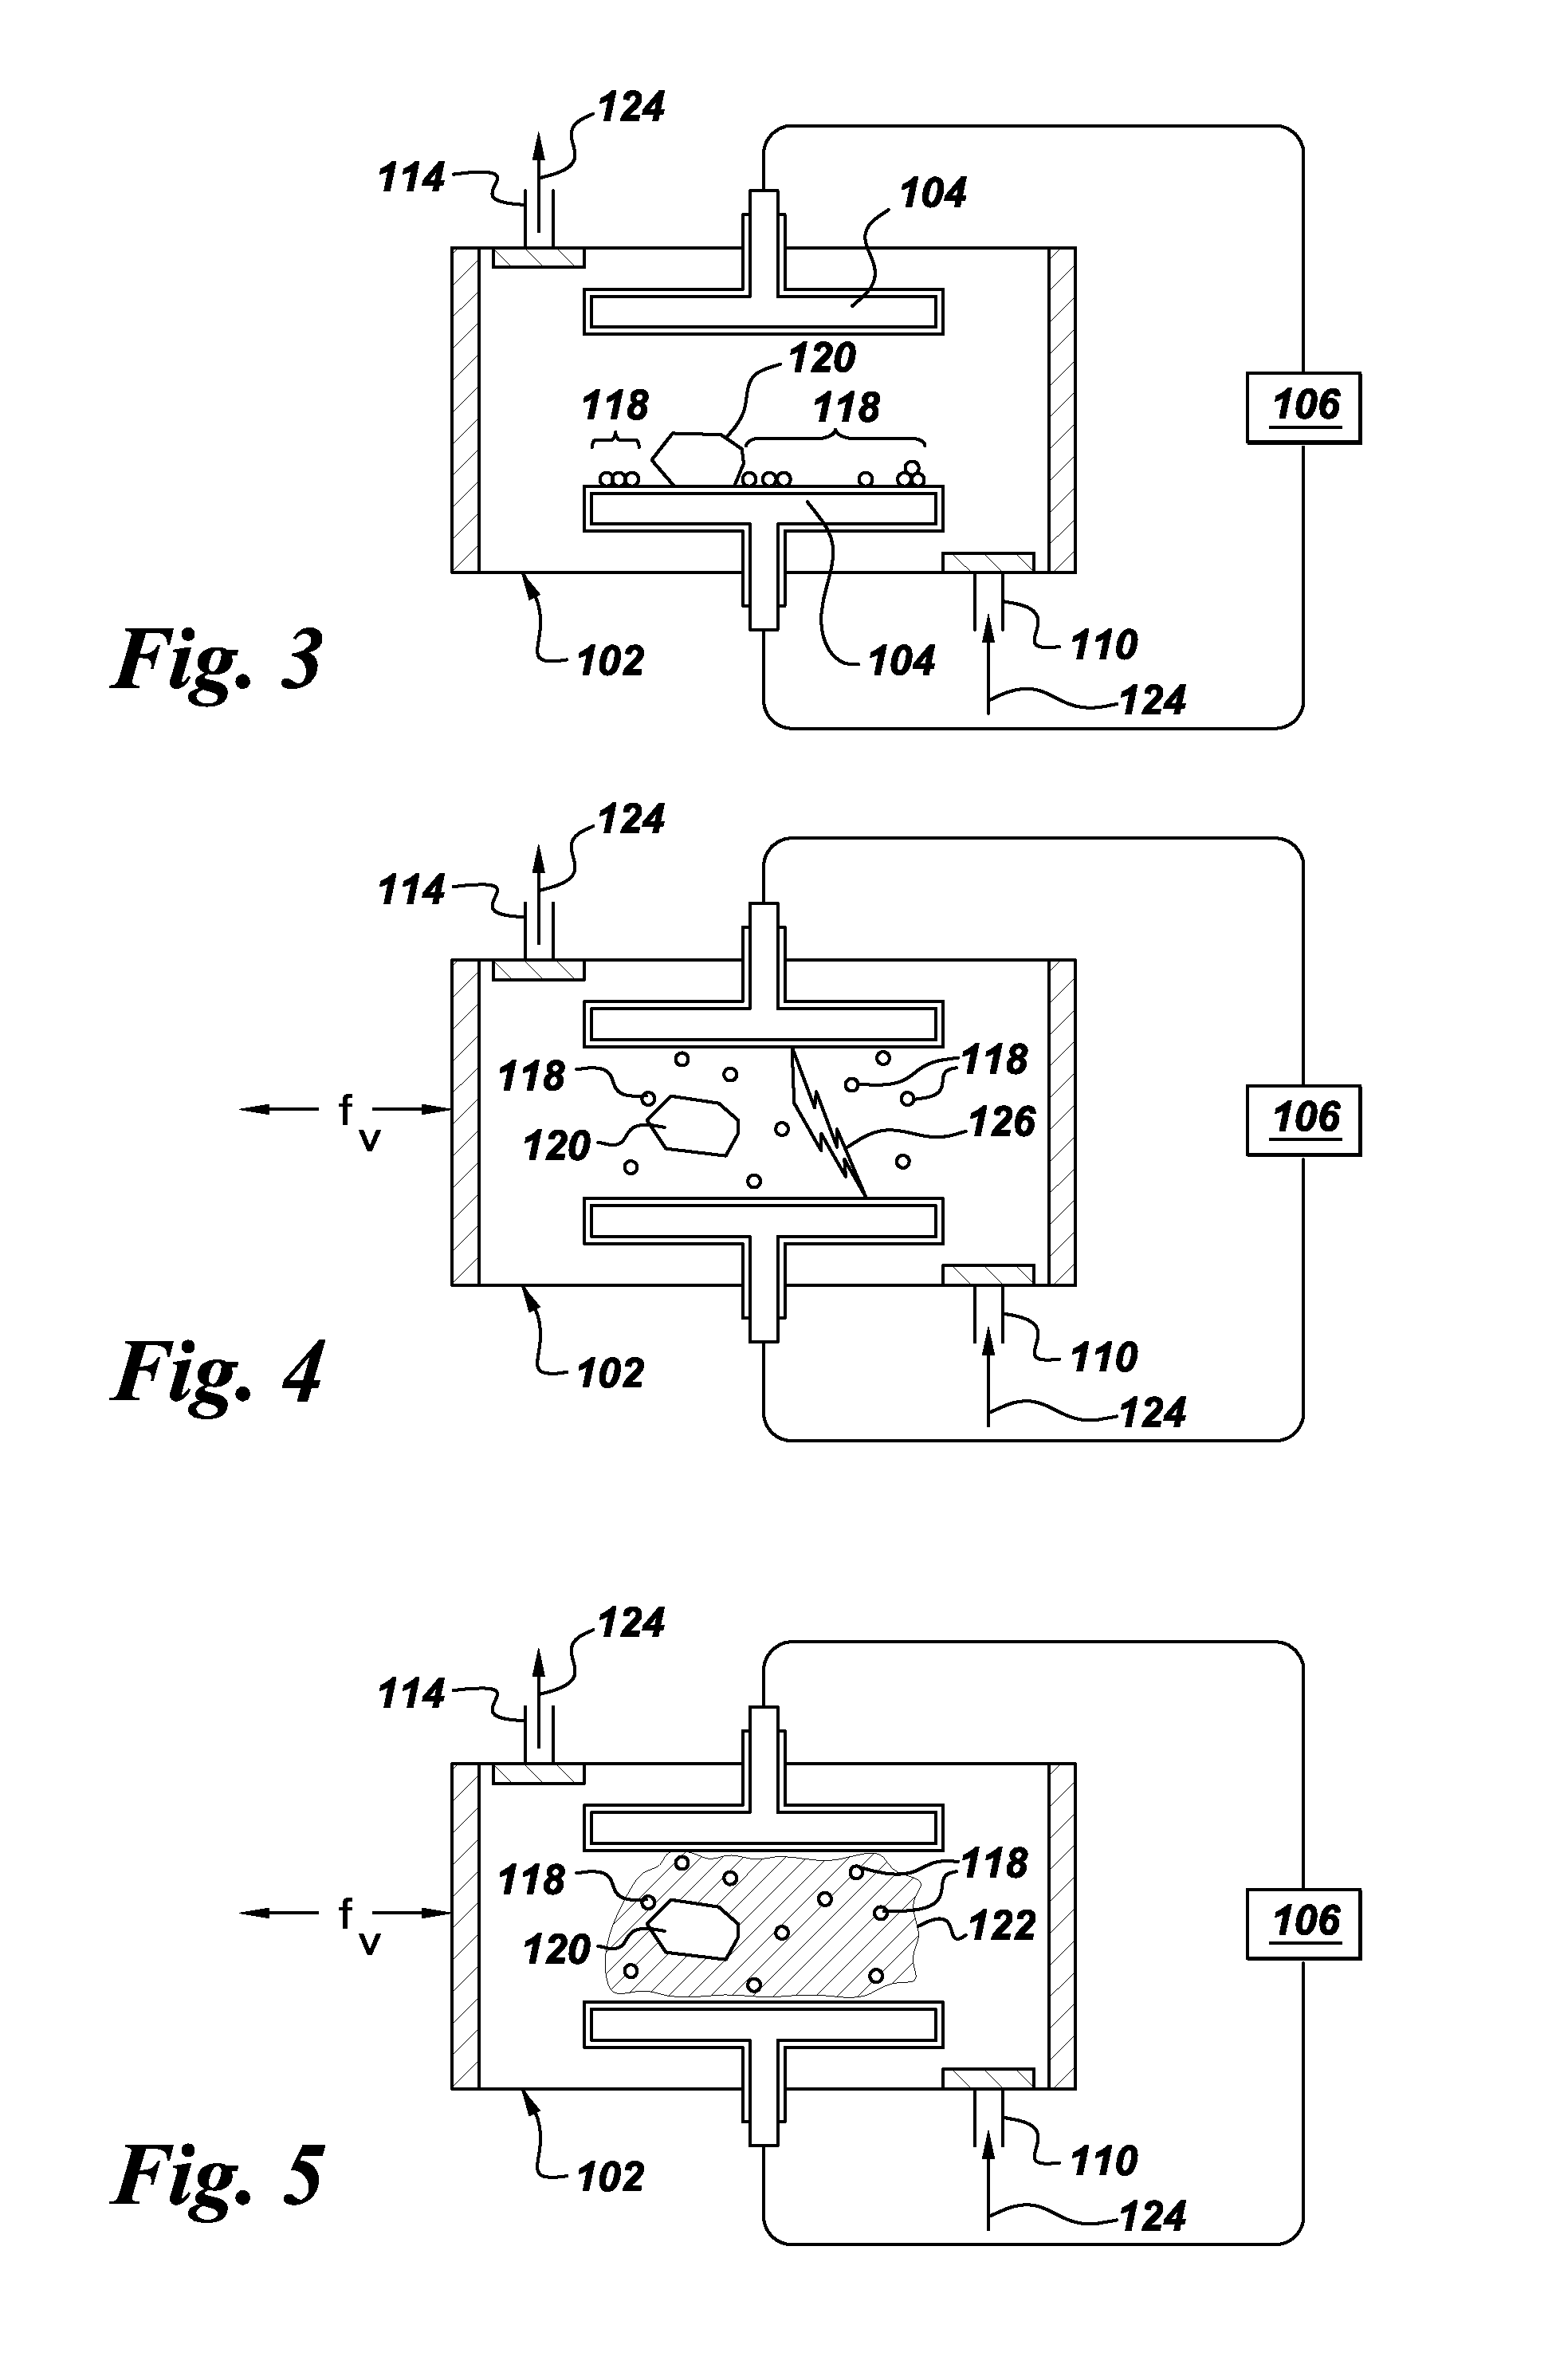 Apparatus and method for producing plasma during milling for processing of material compositions